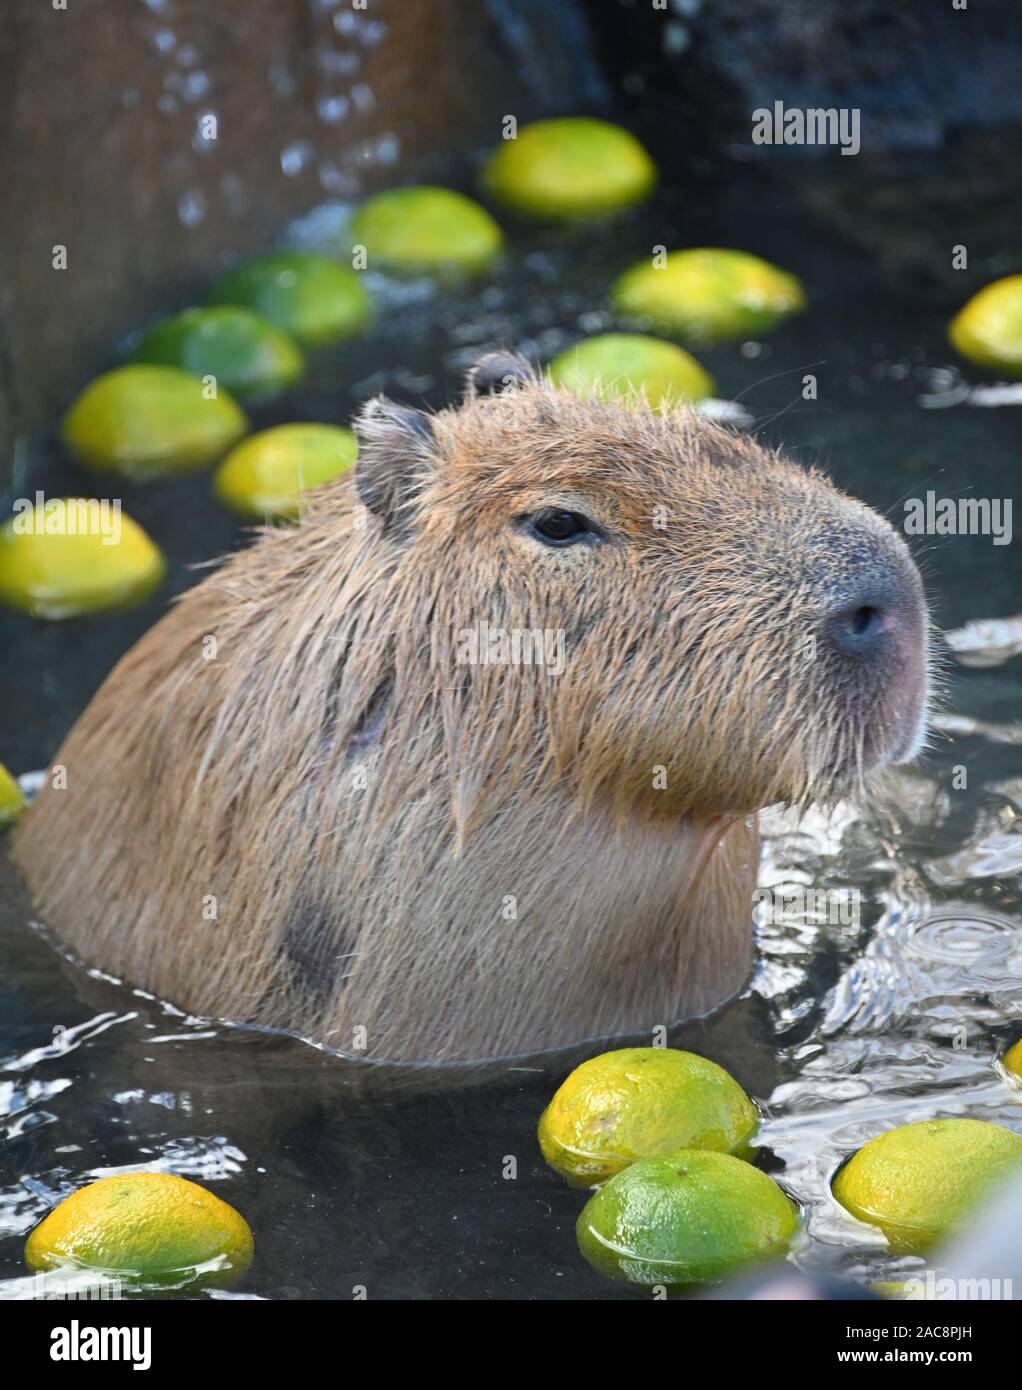 https://c8.alamy.com/comp/2AC8PJH/ito-japan-1st-dec-2019-an-adorable-water-hog-enjoys-an-open-air-hot-sprint-in-izu-cactus-zoological-park-near-city-of-ito-southwest-of-tokyo-on-sunday-december-1-2019-with-the-start-of-the-year-of-the-rat-in-the-ancient-chinese-zodiac-is-just-a-month-away-the-water-hog-also-known-as-capybara-the-largest-rodent-in-the-world-and-a-closer-relative-of-rats-has-become-a-popular-attraction-in-the-park-credit-natsuki-sakaiafloalamy-live-news-2AC8PJH.jpg